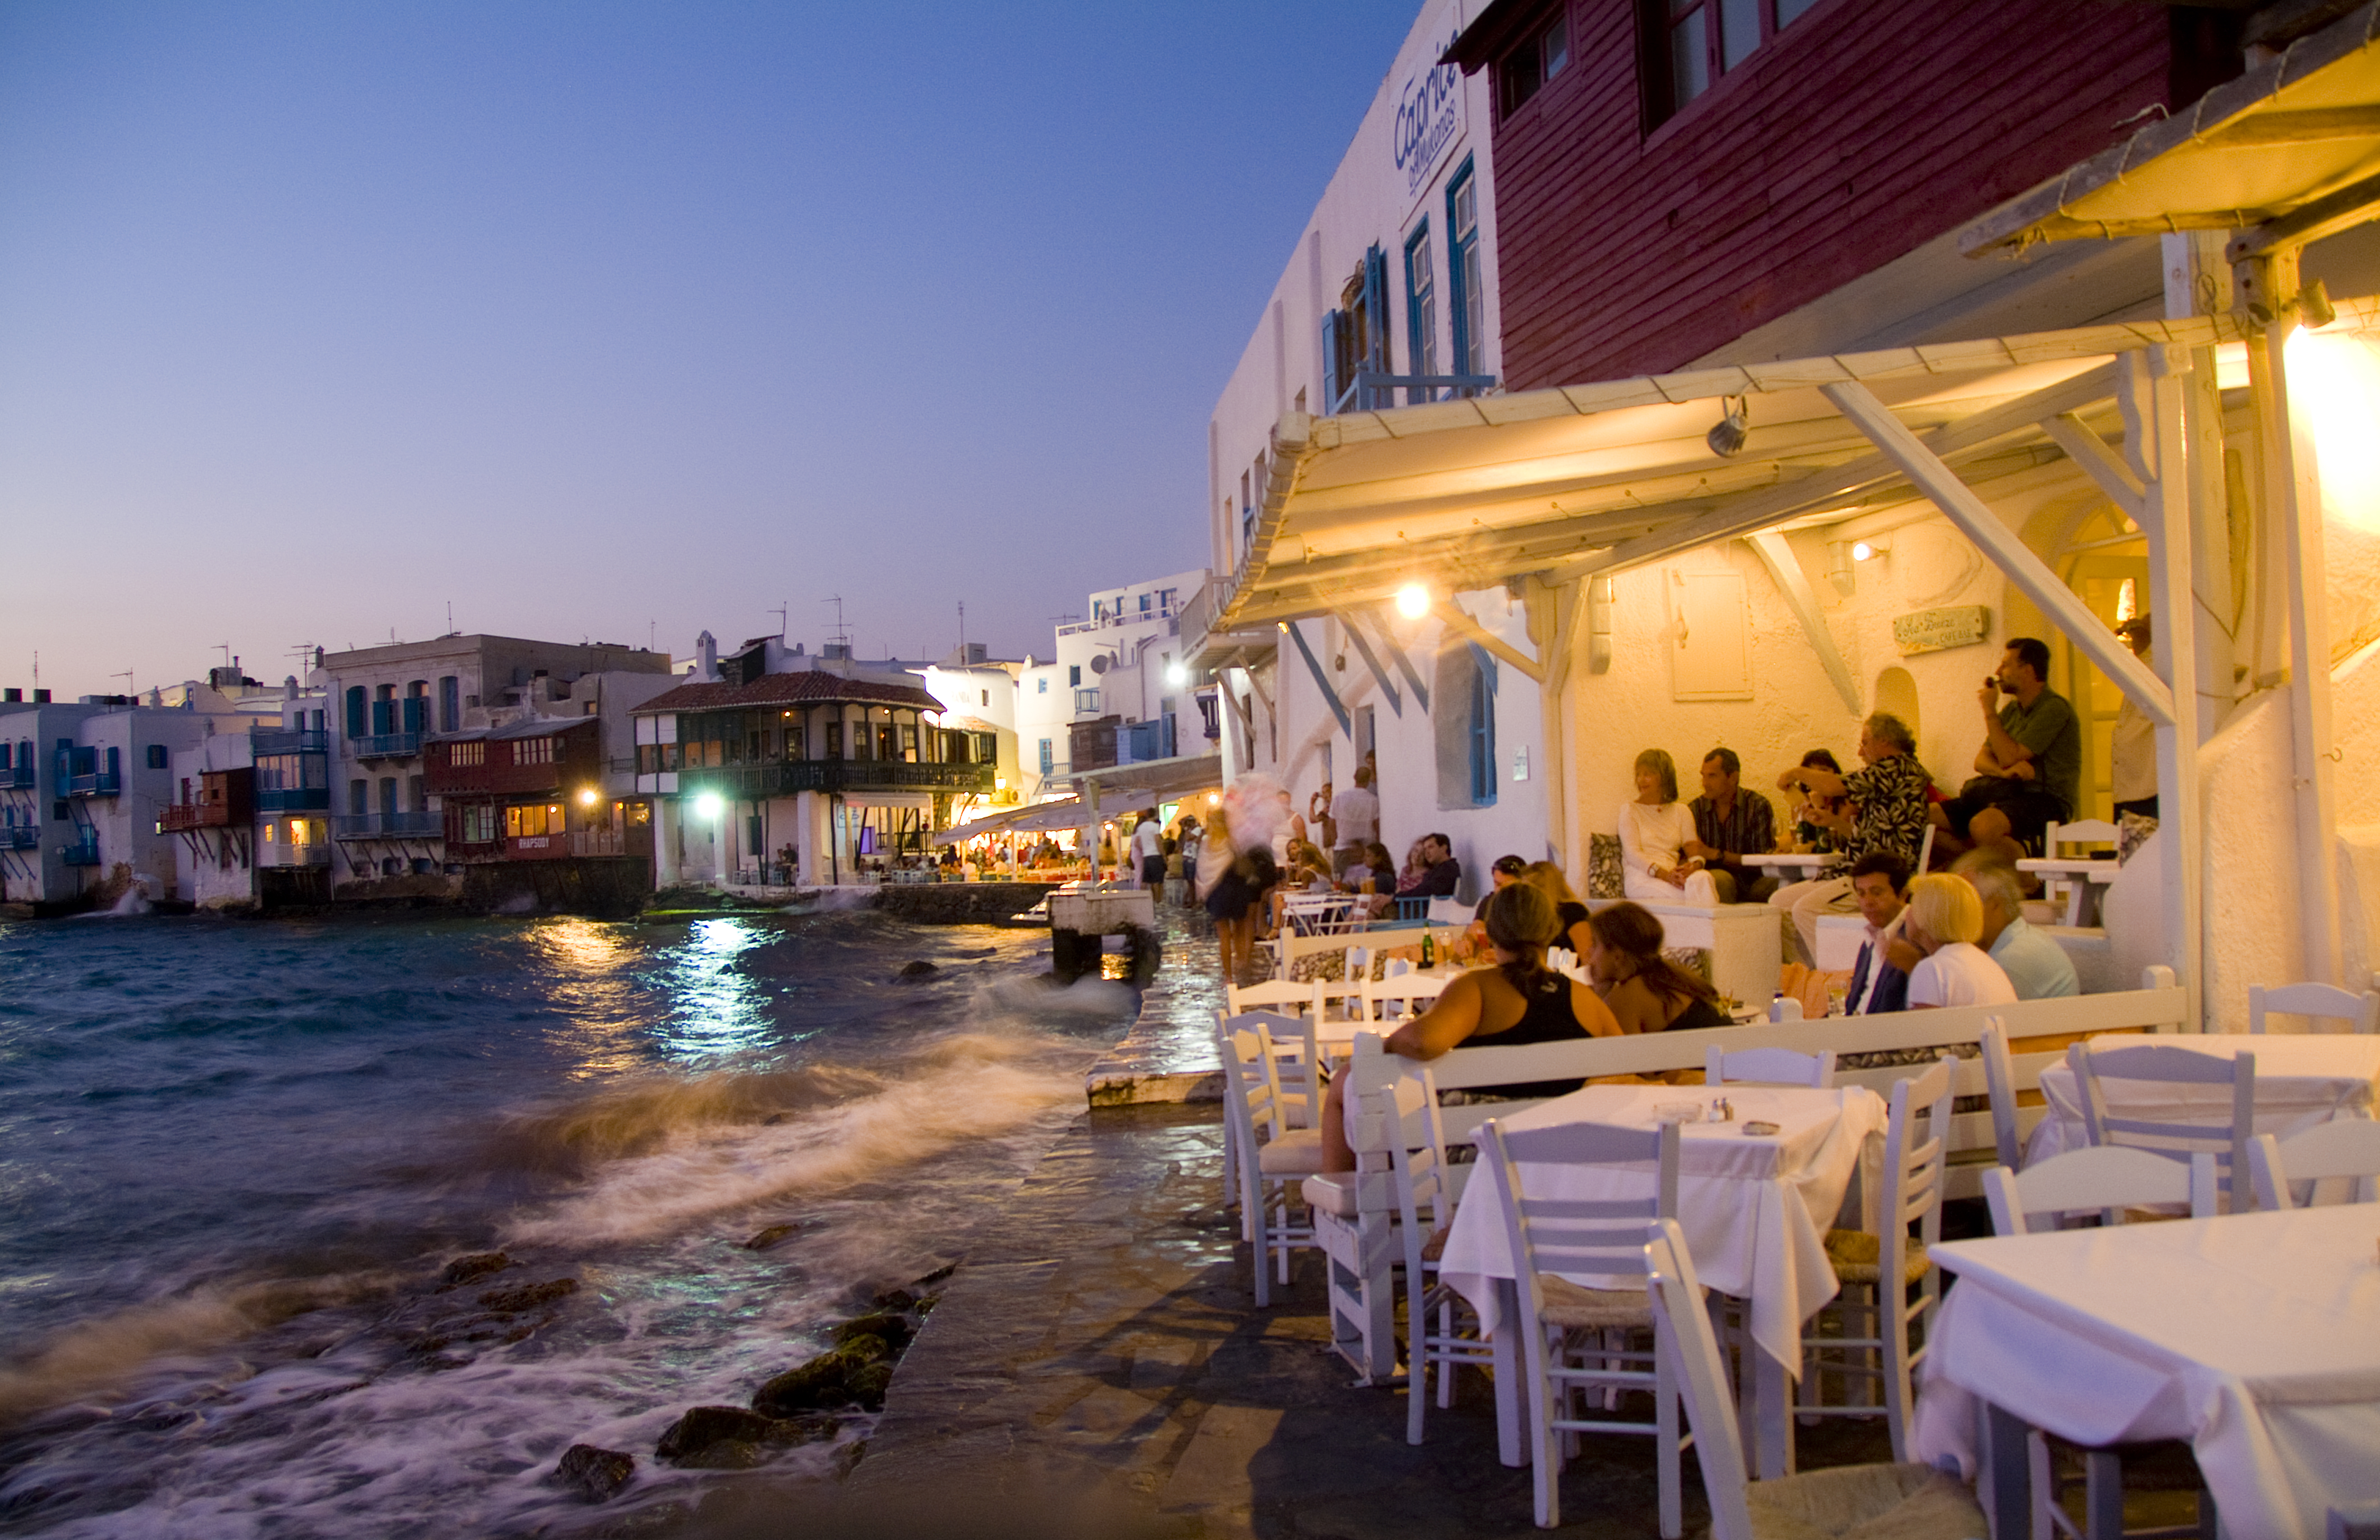 Mykonos, Greece. (Photo by Education Images/UIG via Getty Images)